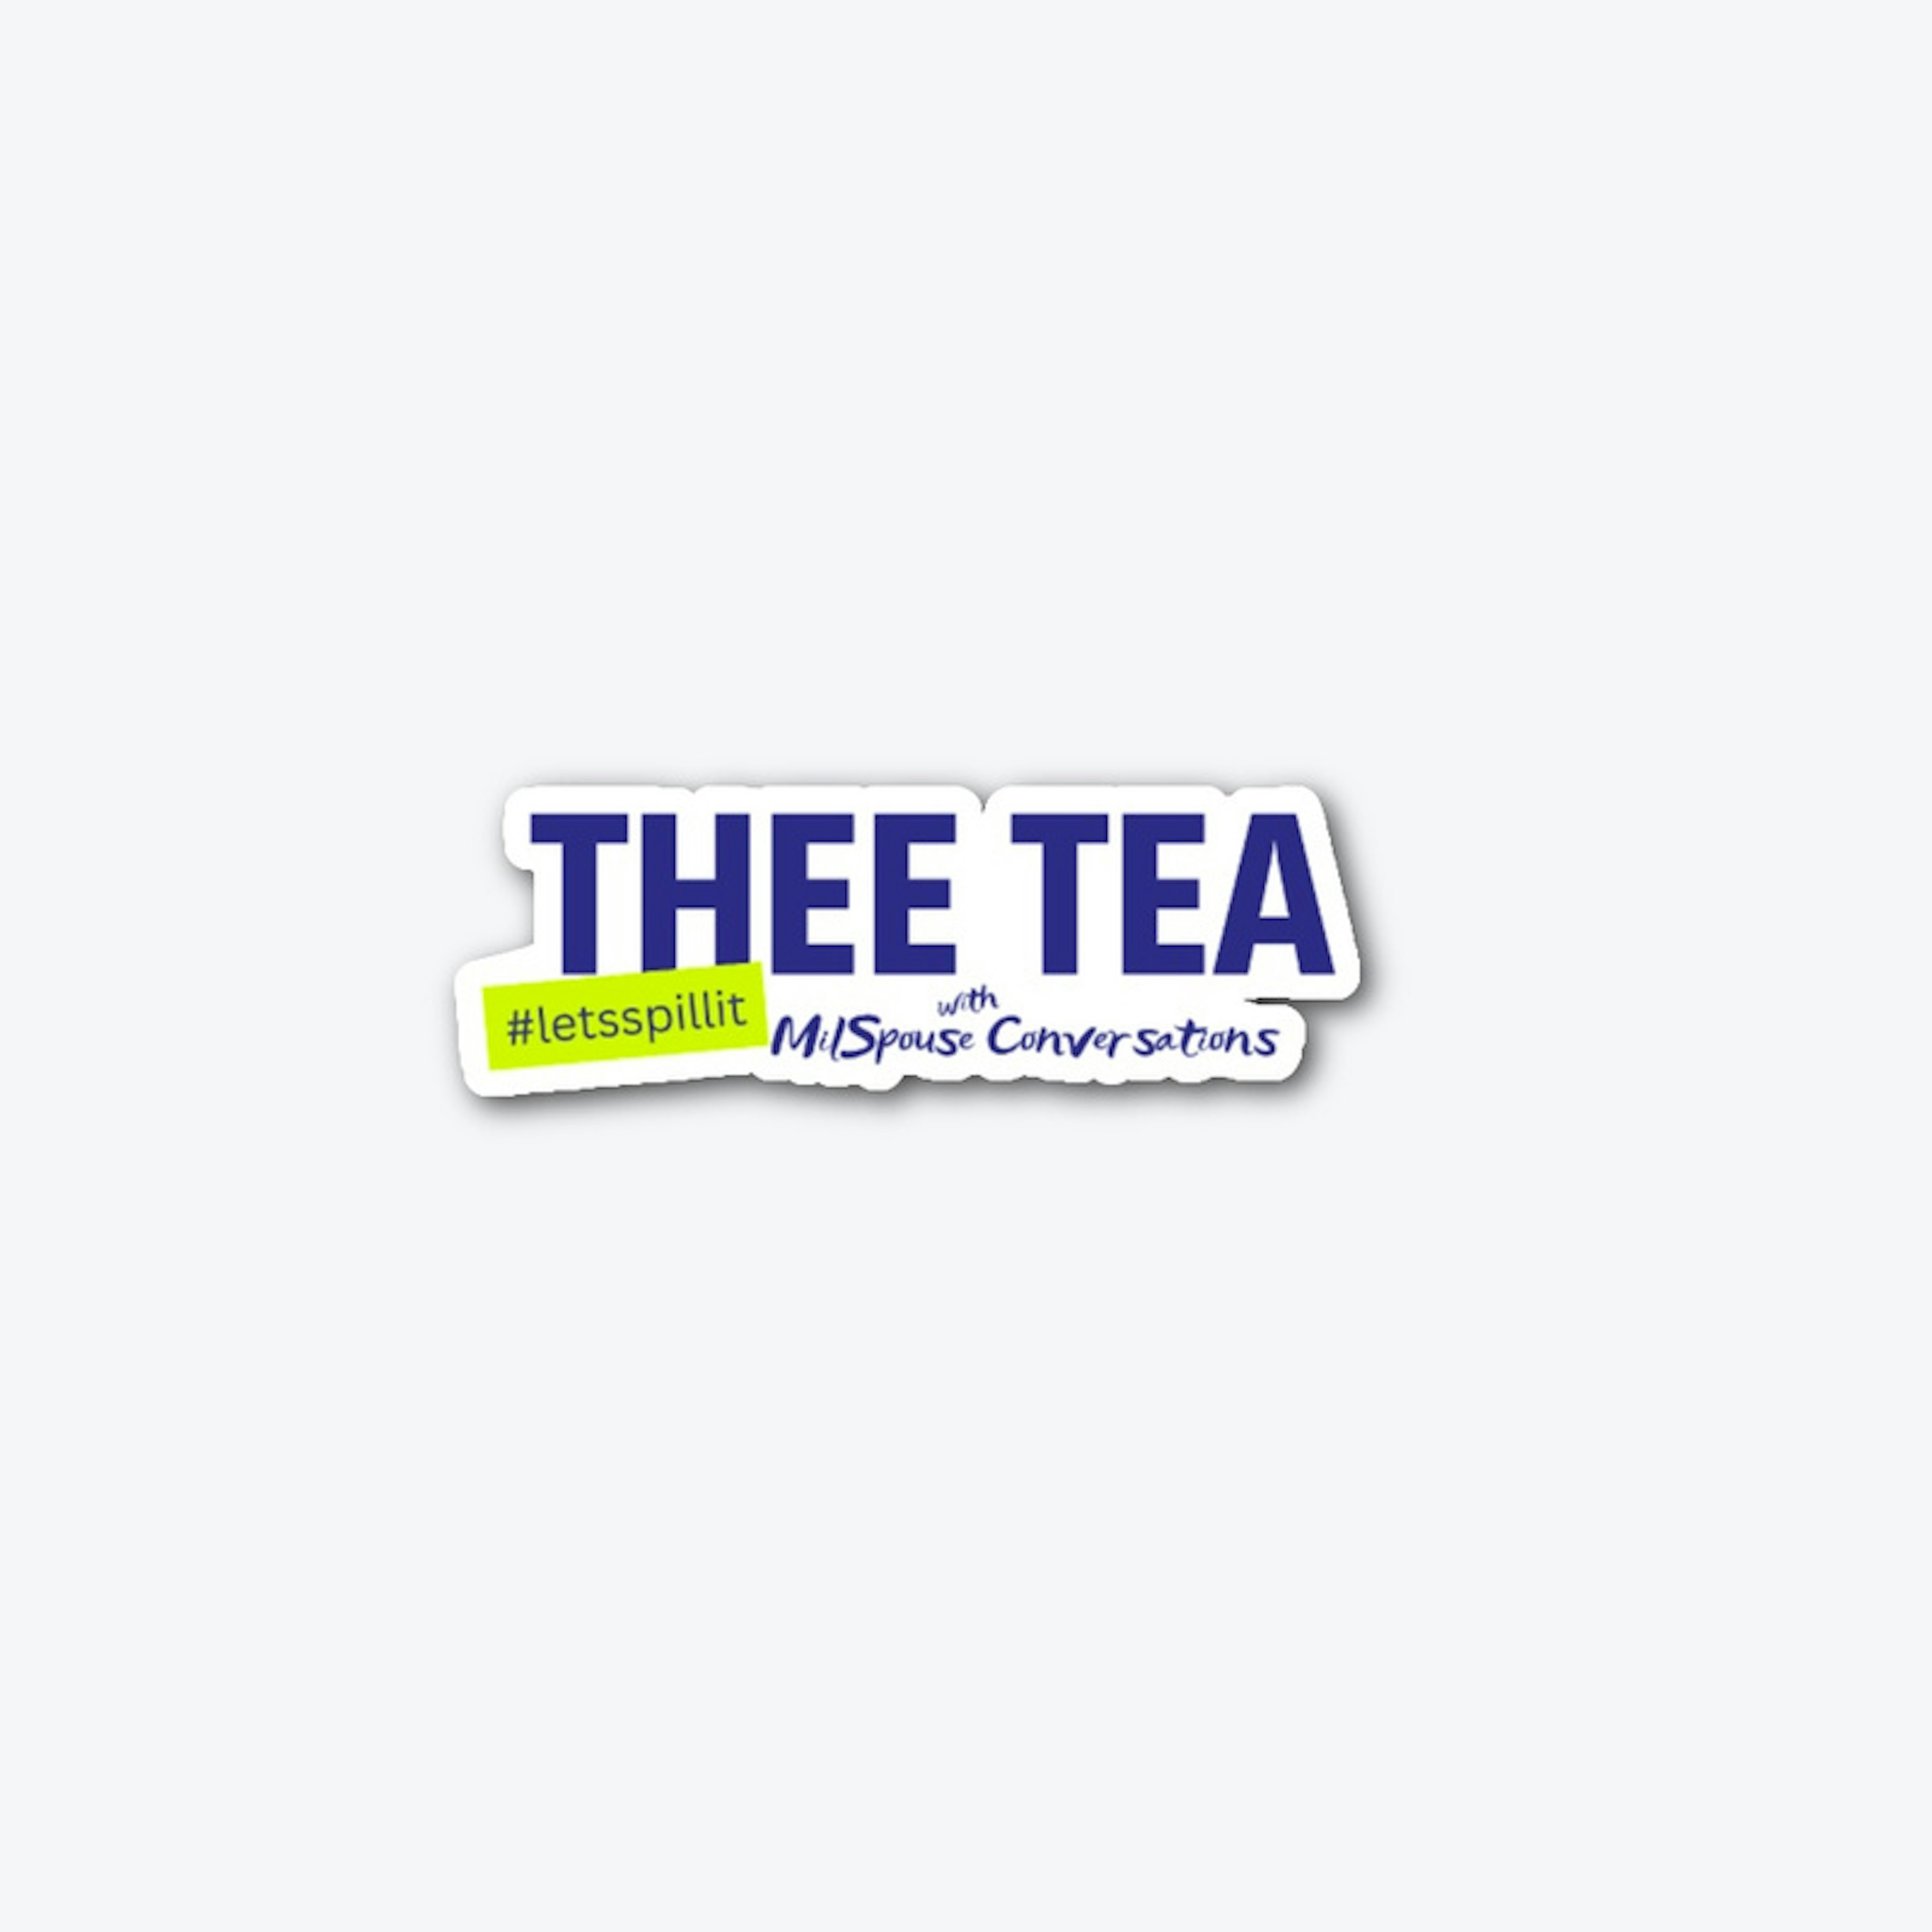 THEE Tea Podcast Show Merch 